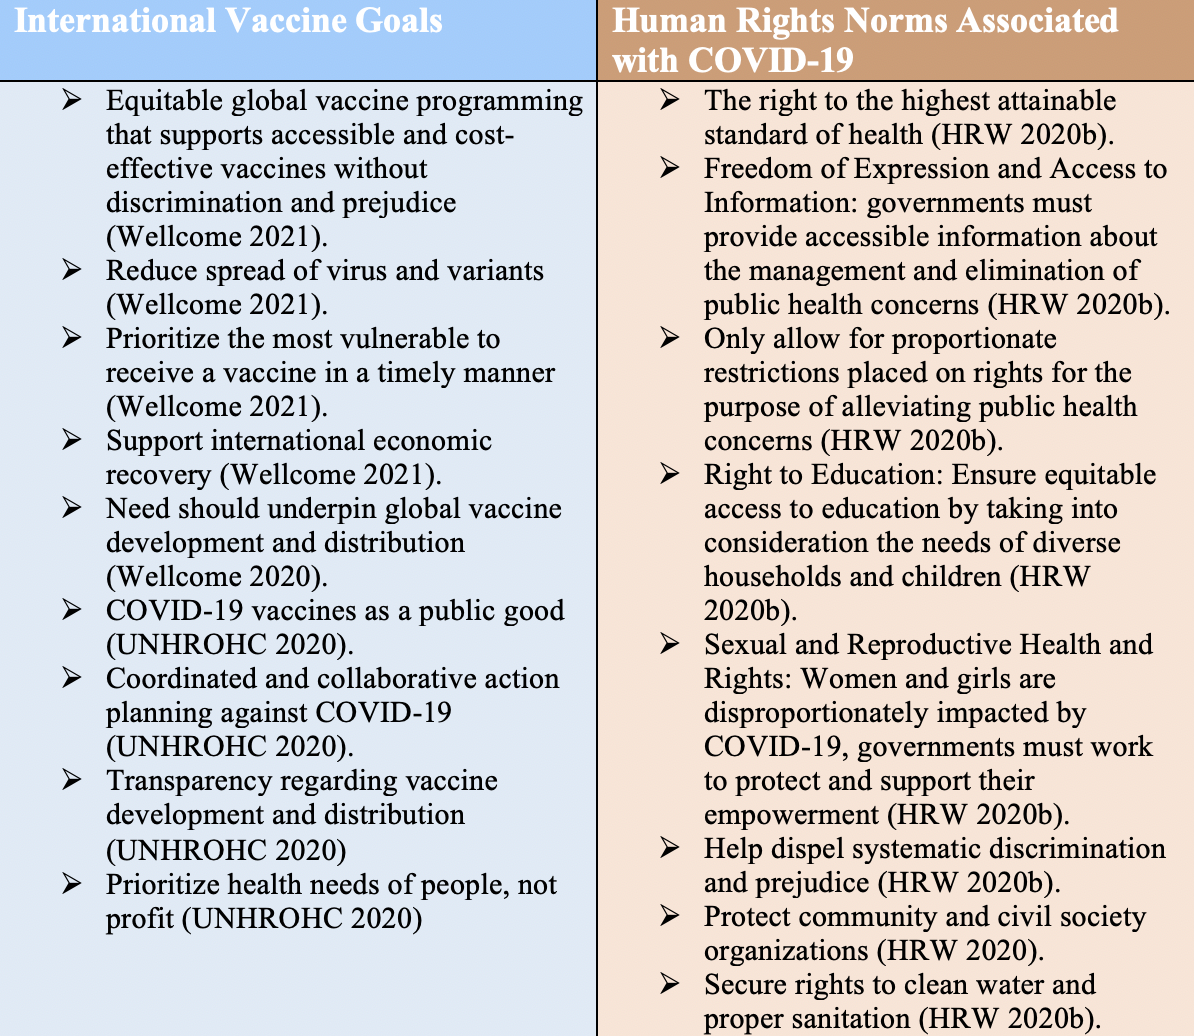 Appendix lists general international vaccine goals and the human rights norms associated with COVID-19